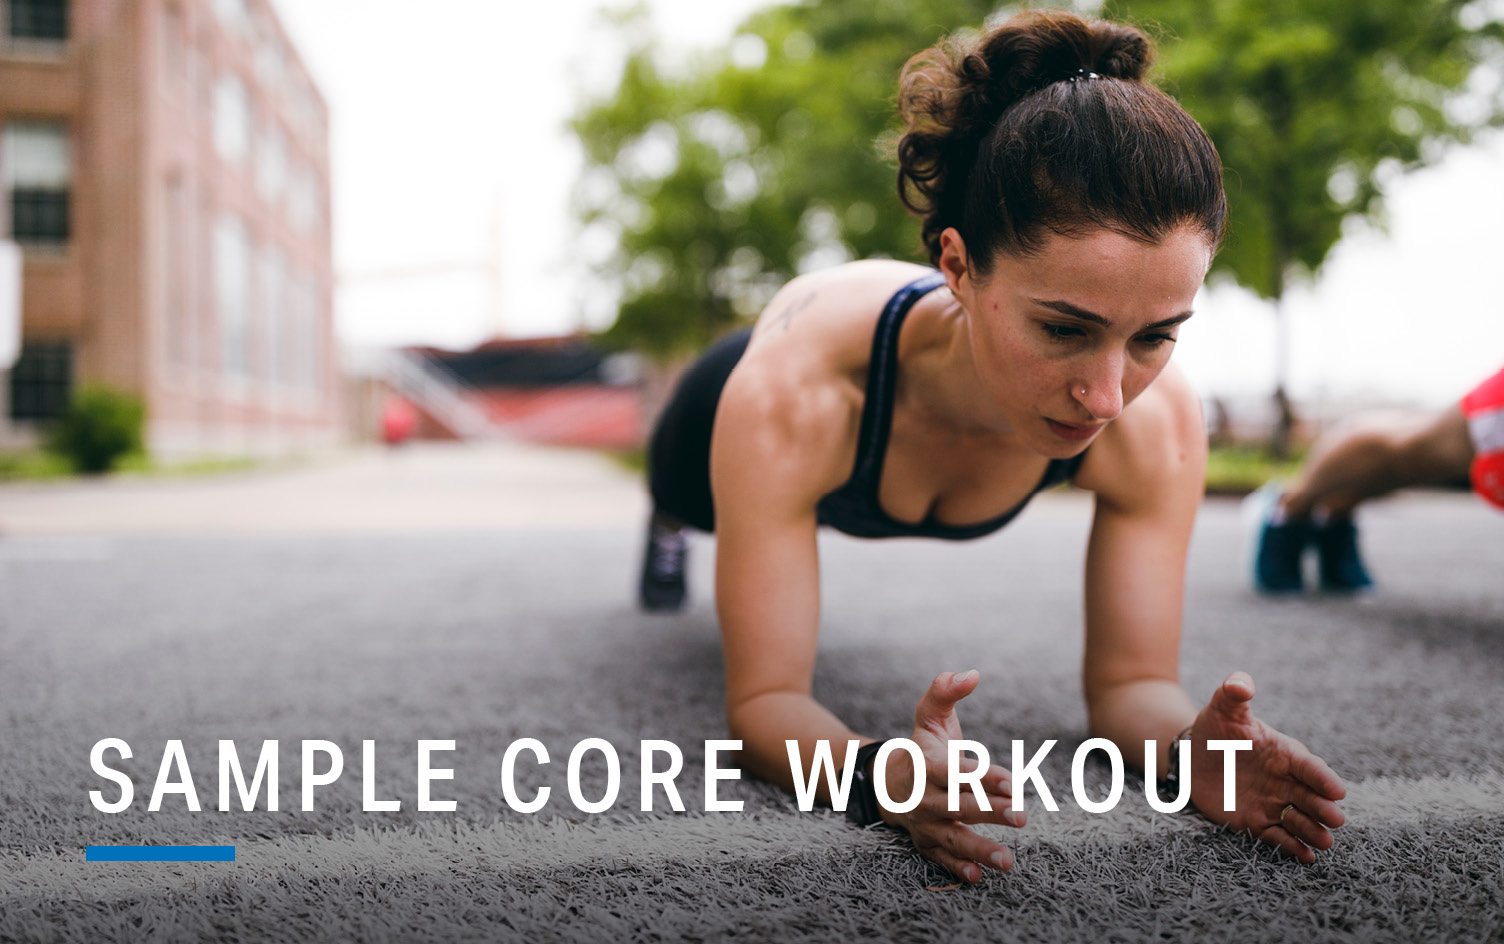 Want a stronger core – skip the sit-ups - Harvard Health